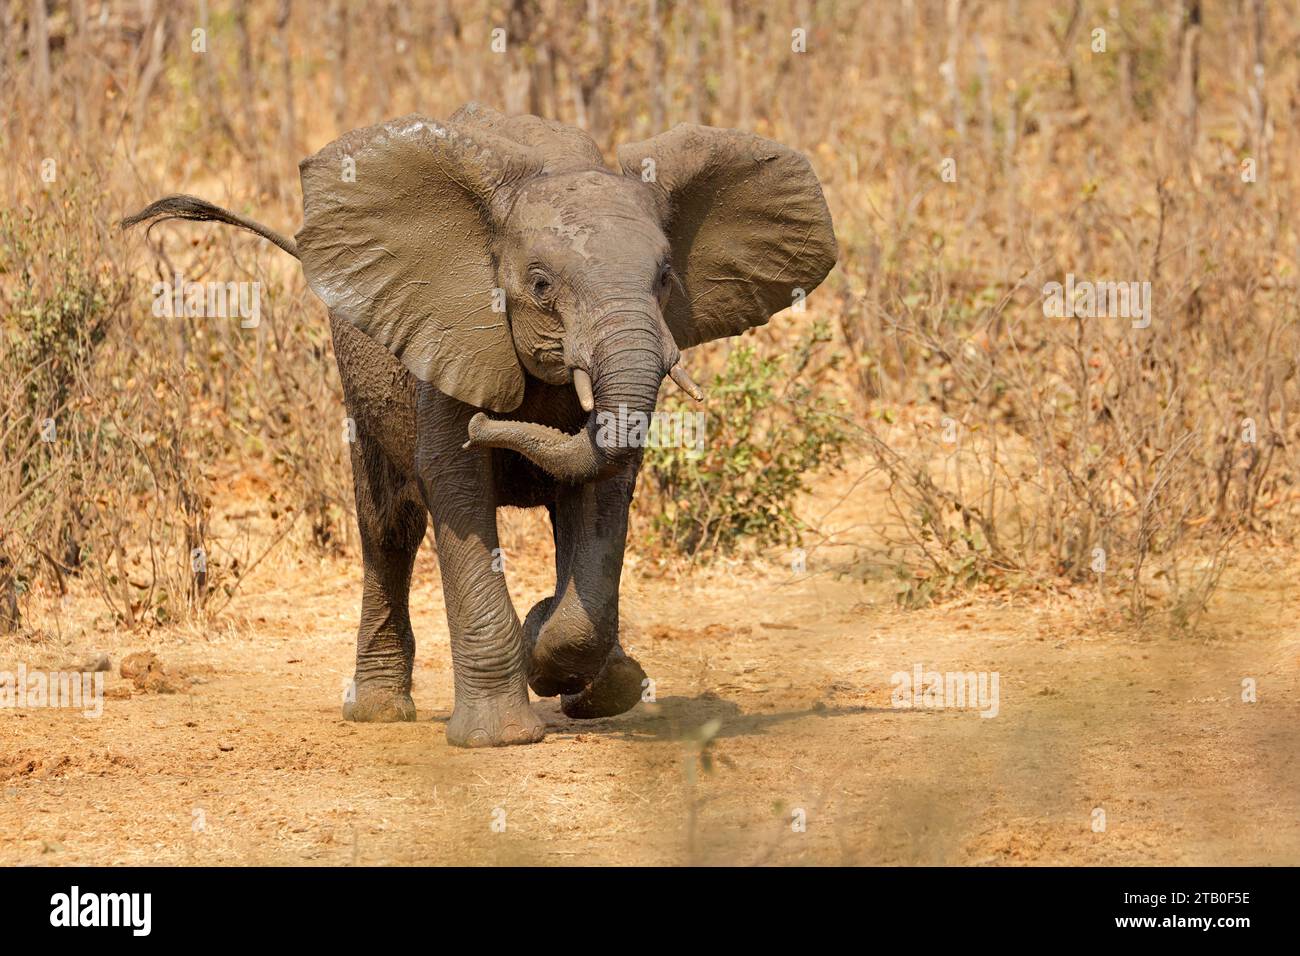 An aggressive African elephant (Loxodonta africana), Kruger National Park, South Africa Stock Photo